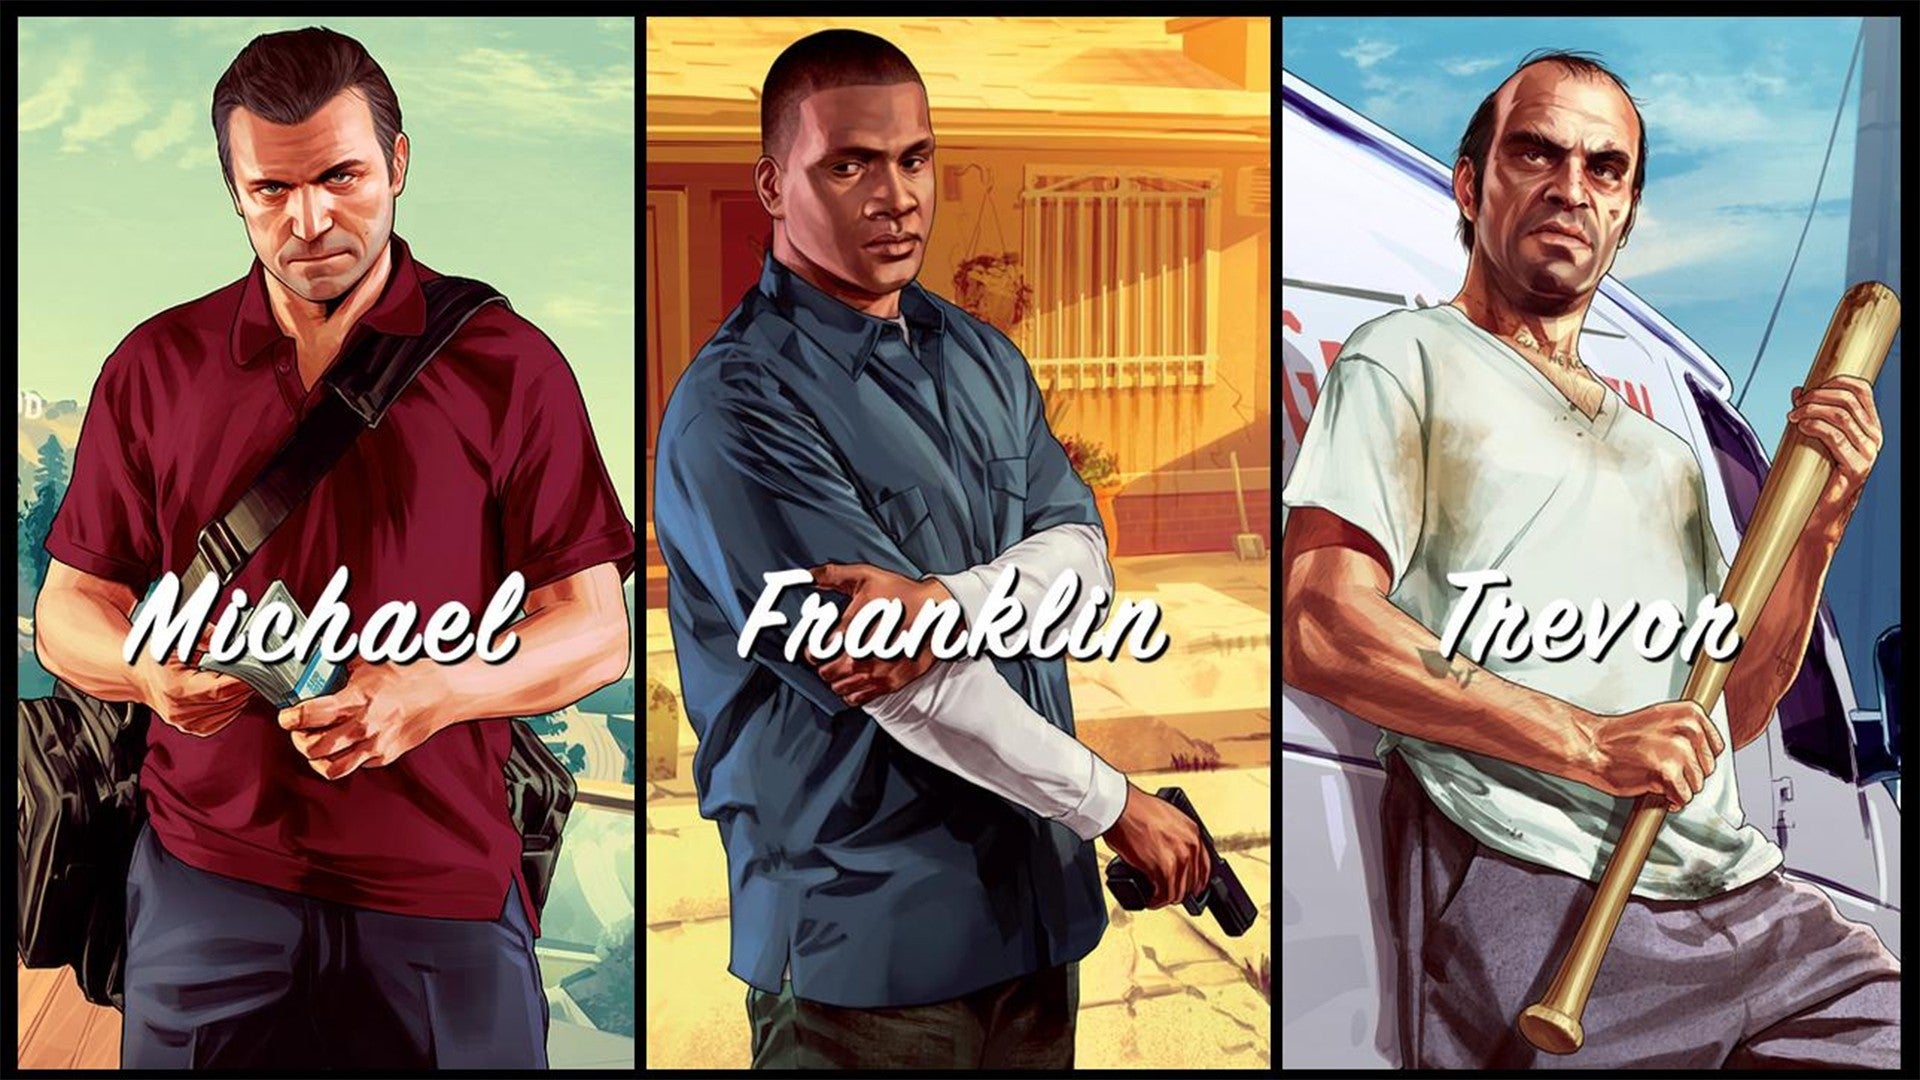 Gta 5 First Gameplay Trailer Released By Rockstar Release Date Images, Photos, Reviews